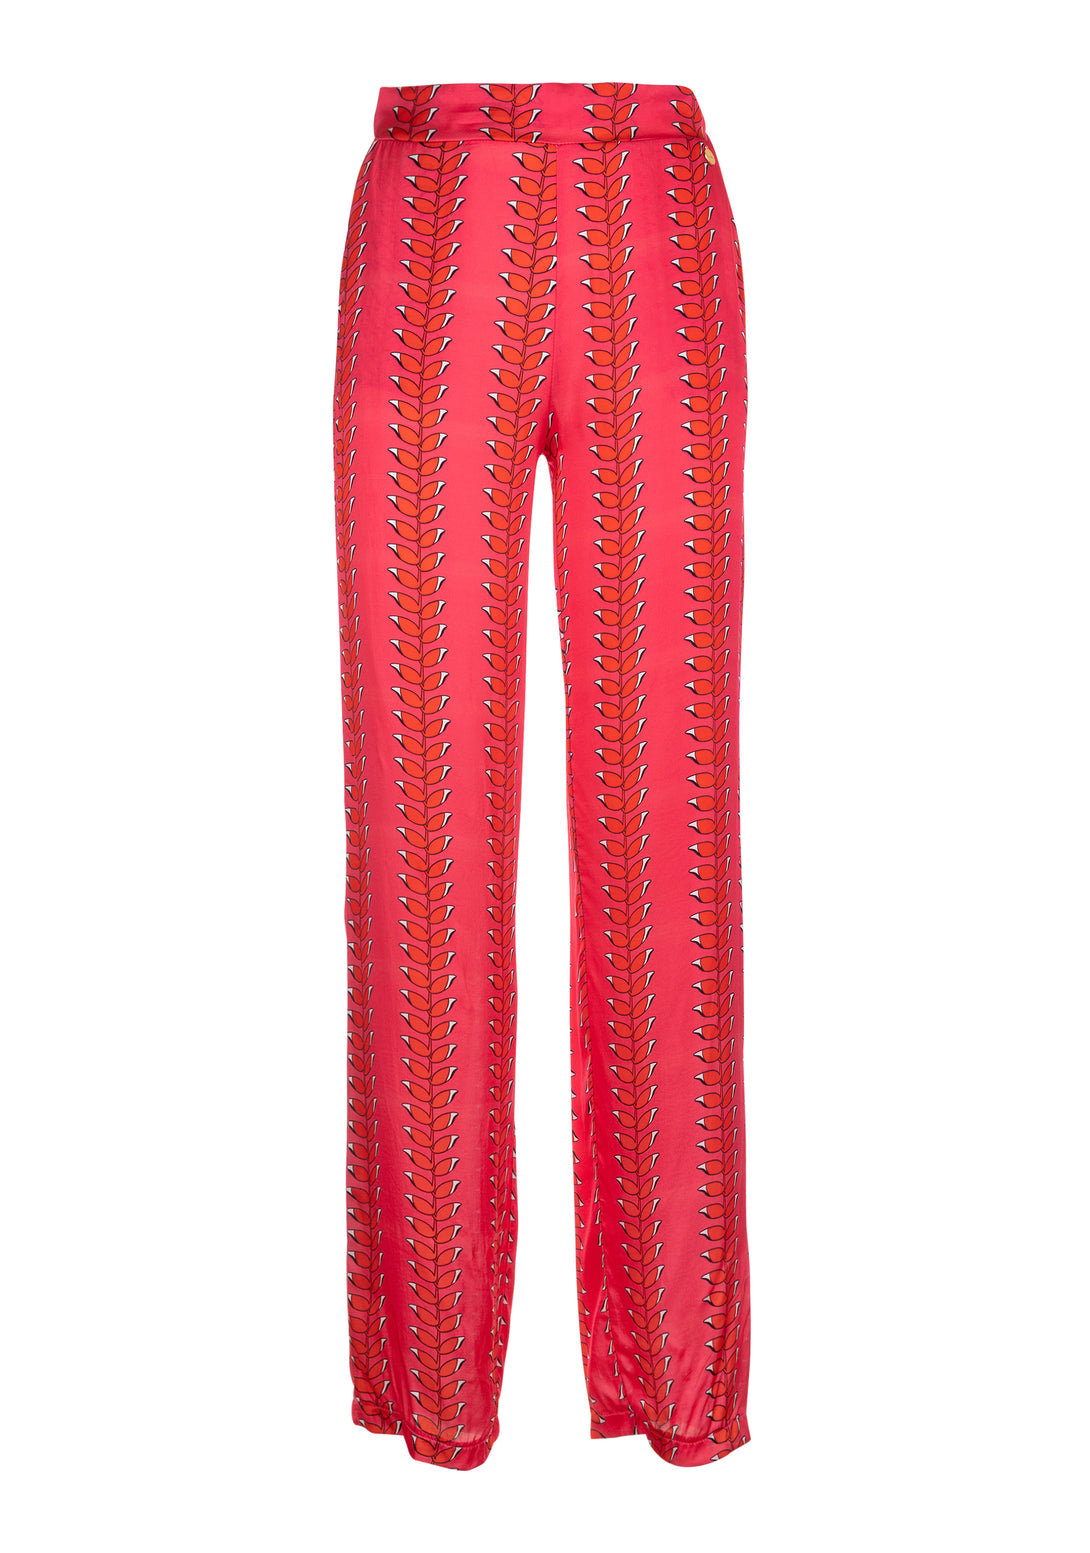 Palazzo pant wide fit with geometric pattern